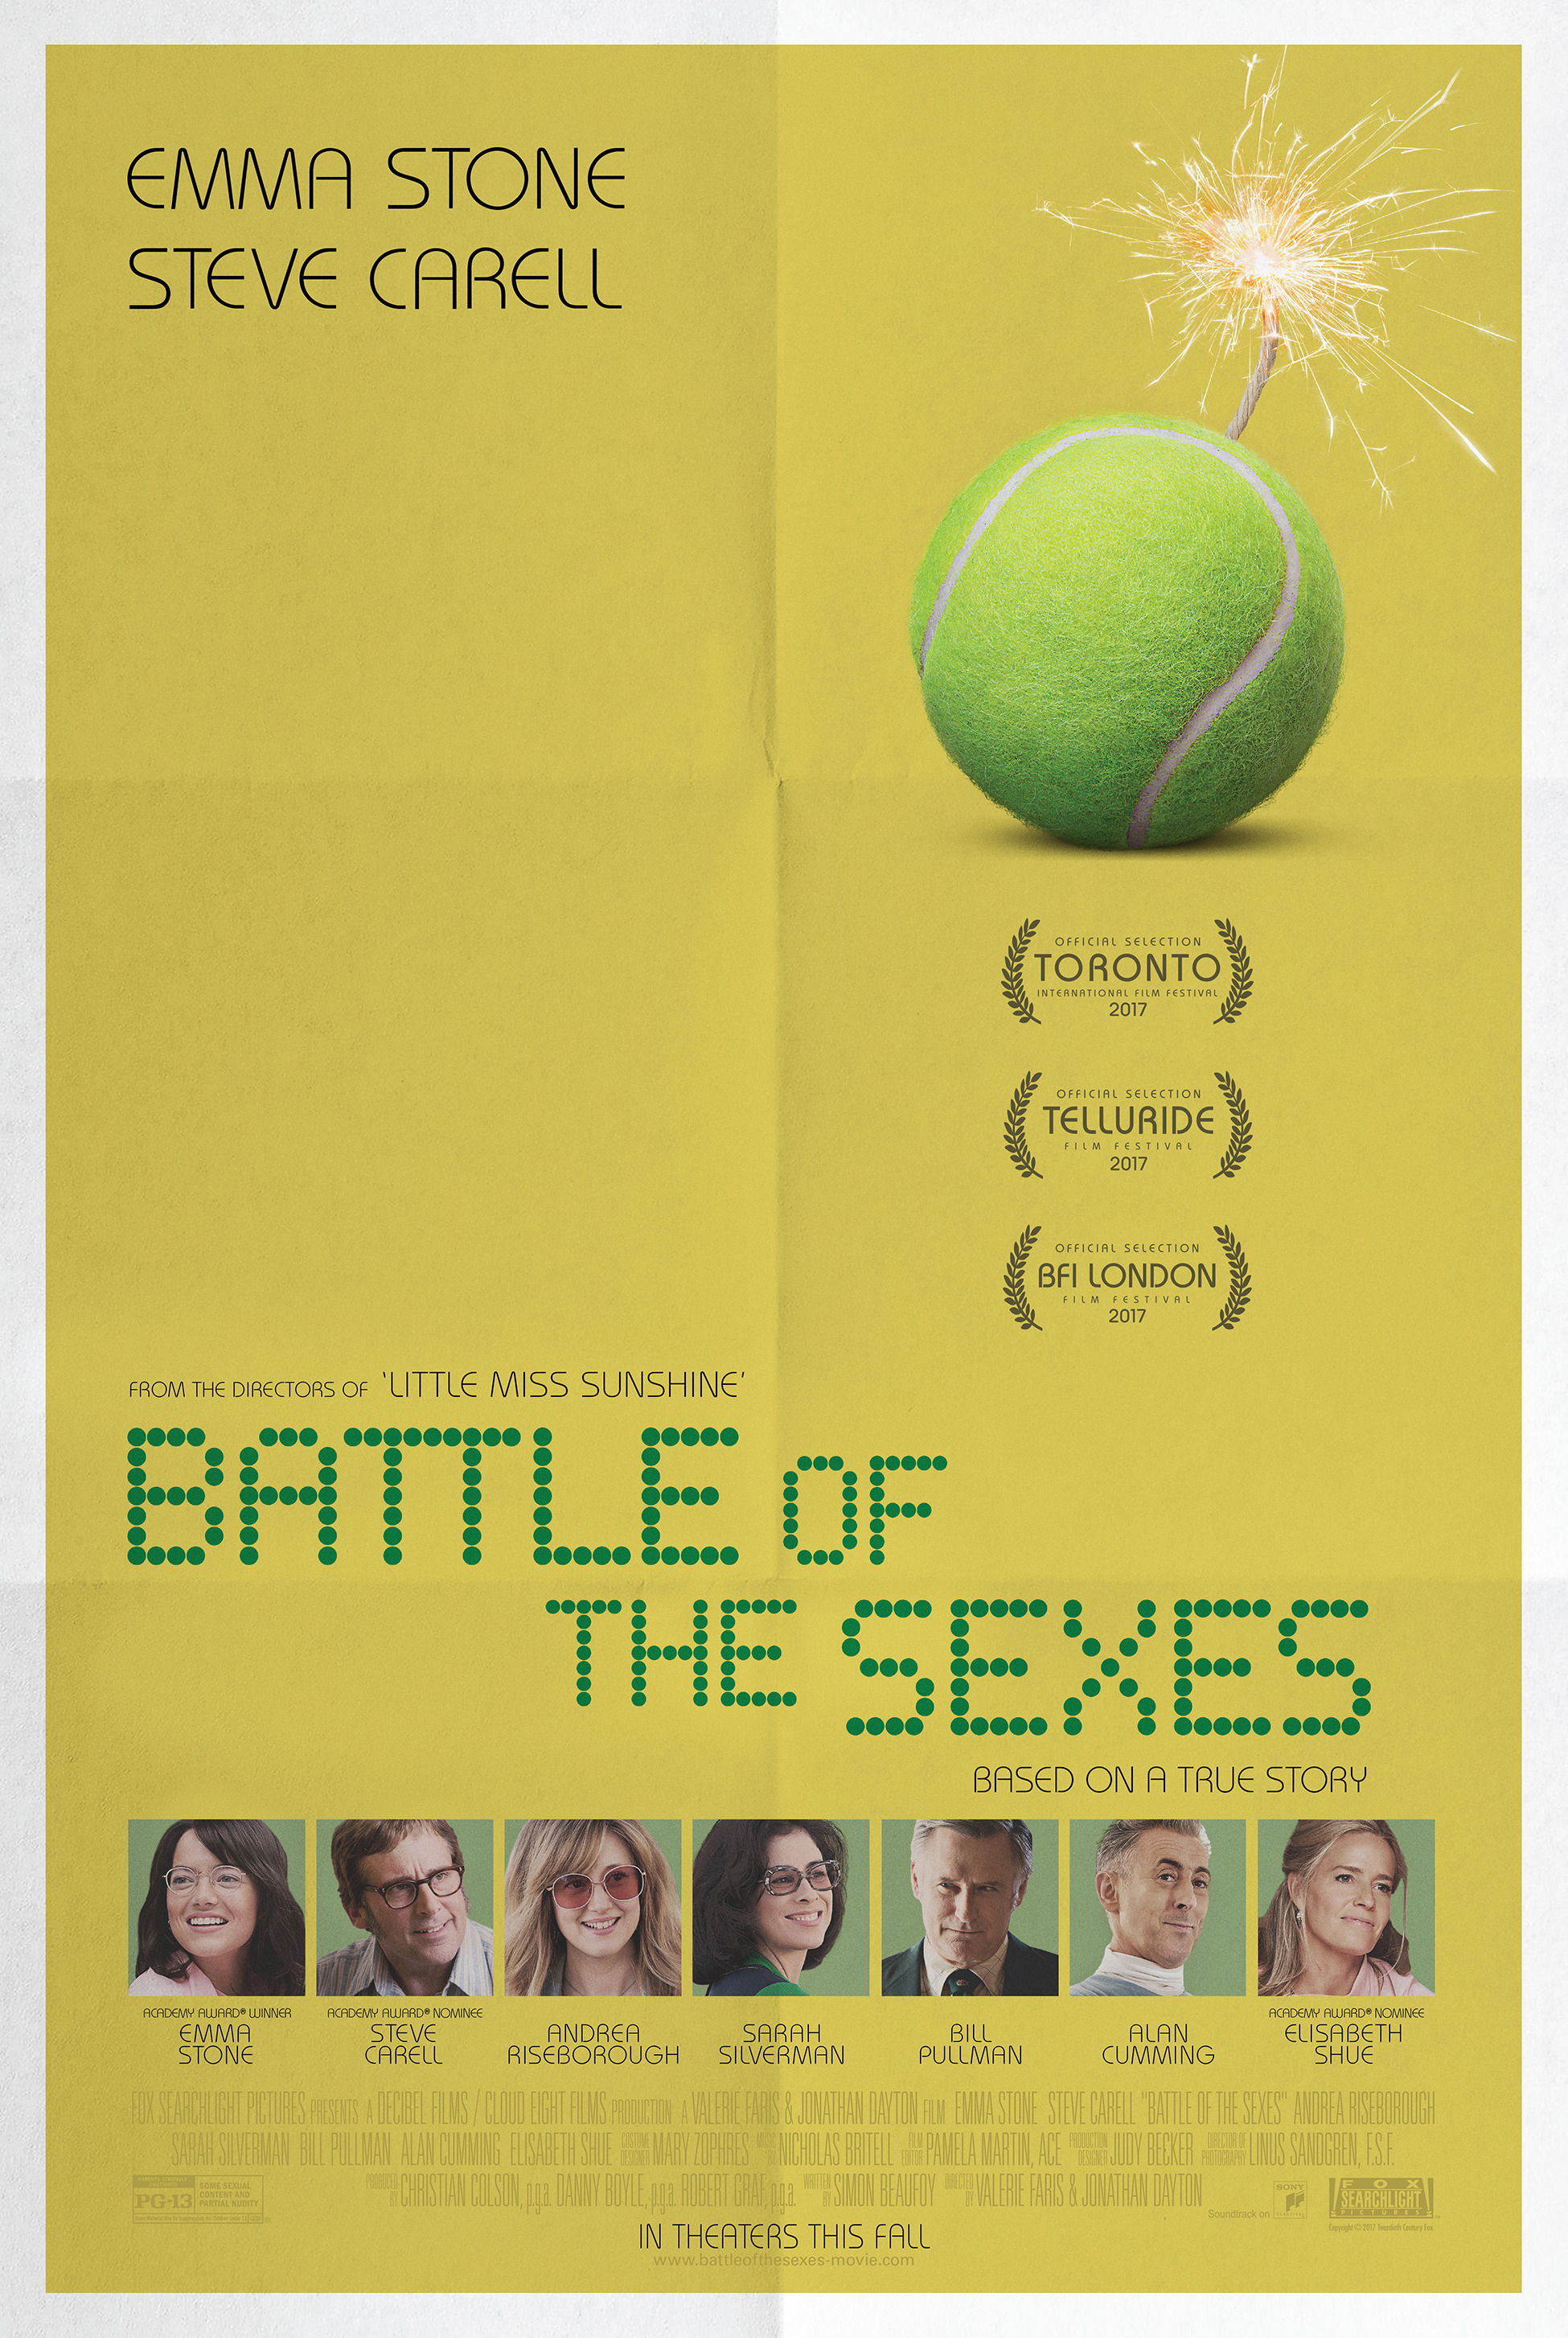 The Battle of the Sexes : Extra Large Movie Poster Image - IMP Awards